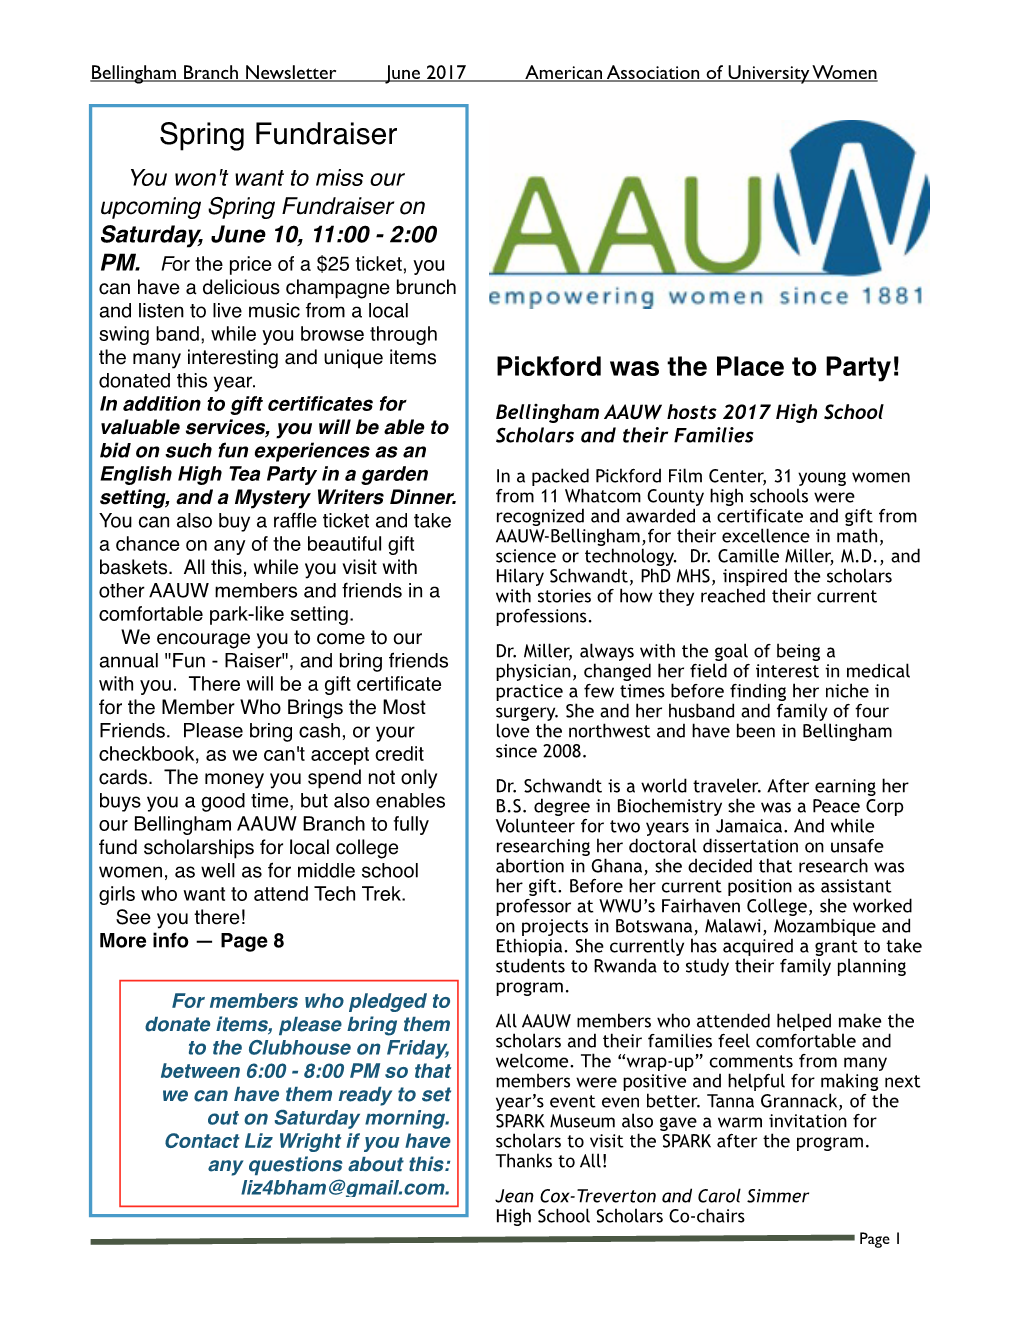 June 2017 AAUW Newsletter.Pages